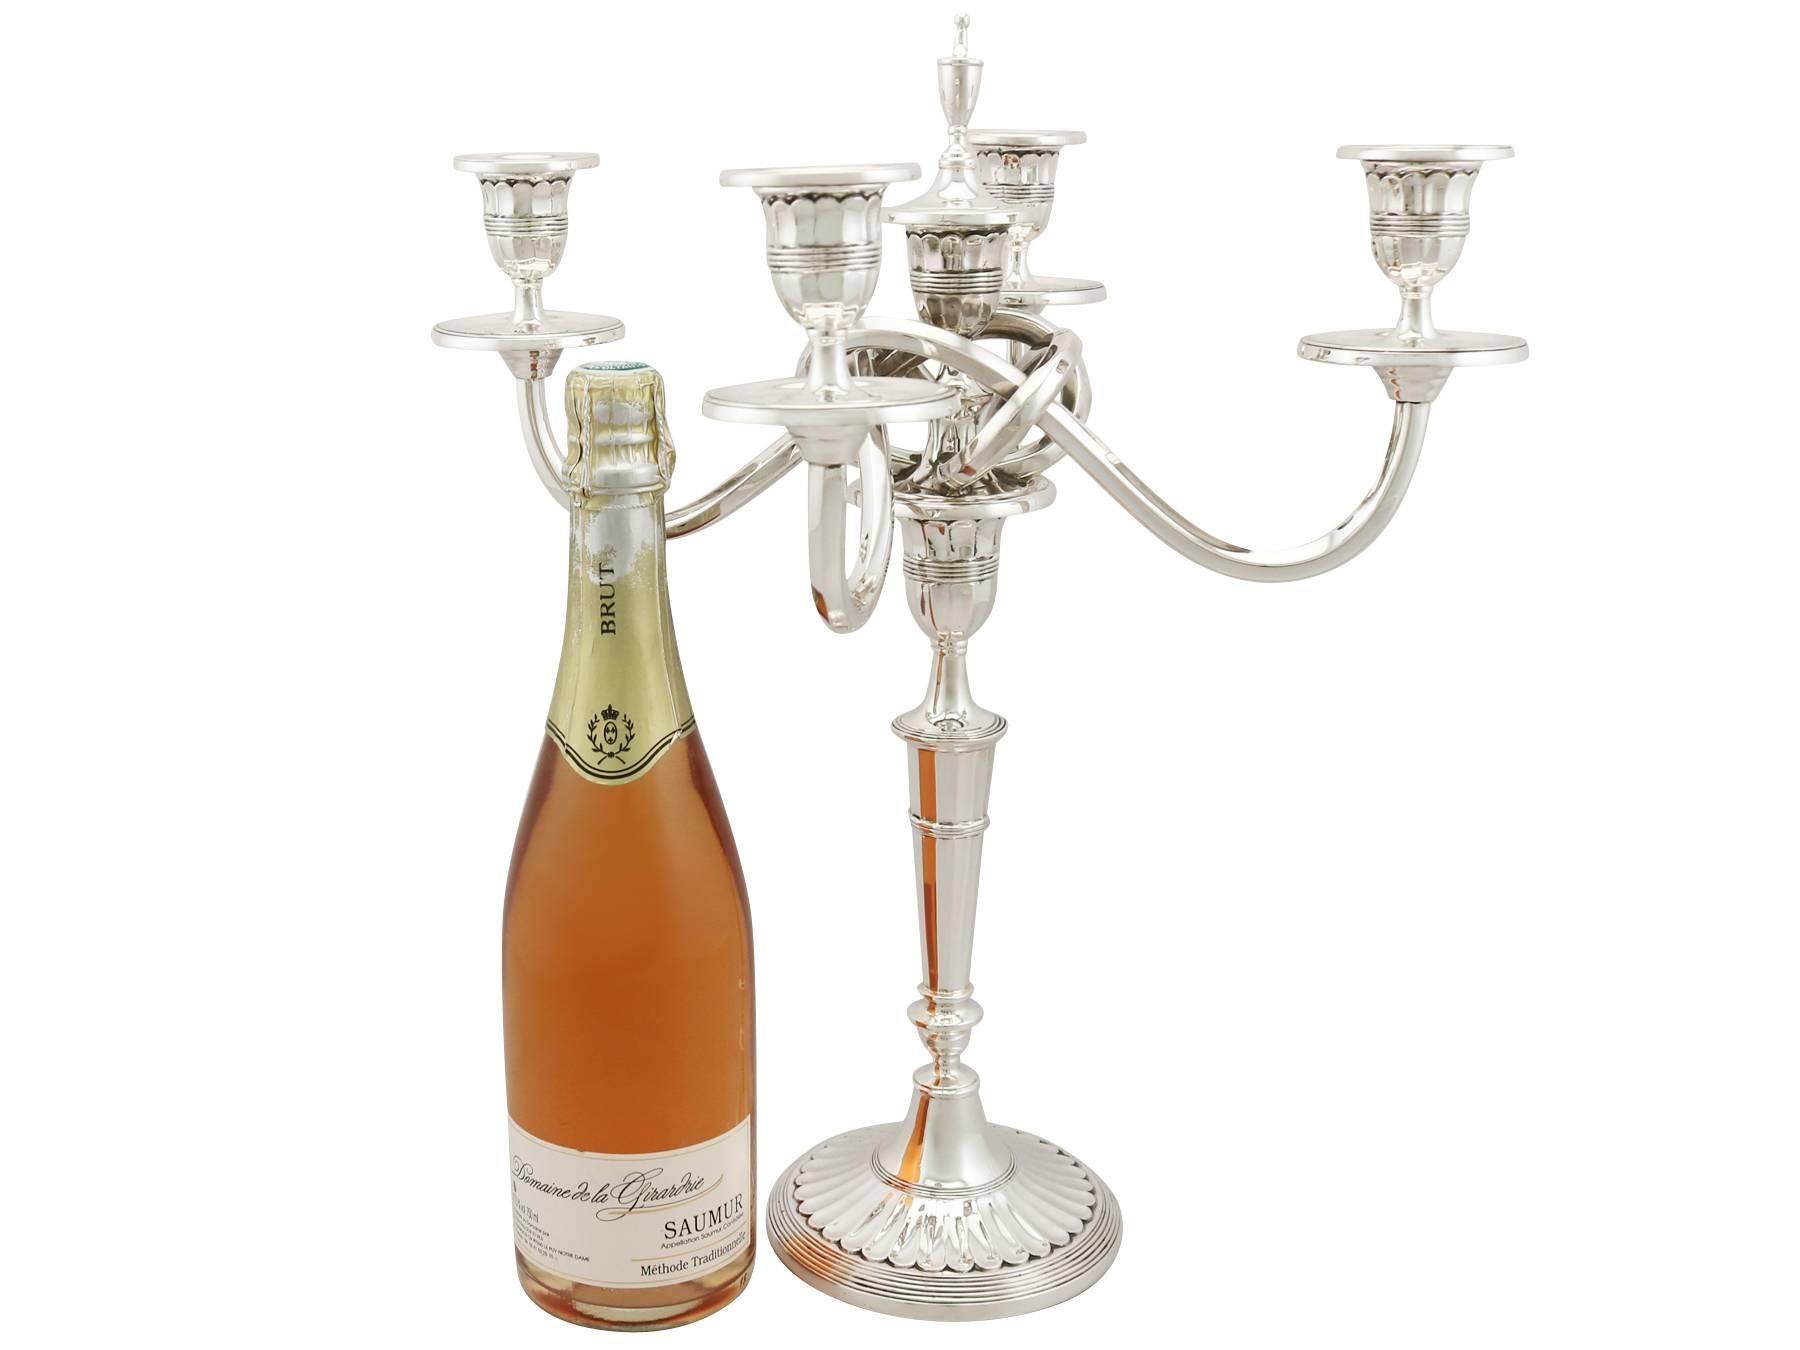 An exceptional, fine and impressive pair of Portuguese 916 standard silver candelabra; an addition to our ornamental continental silverware collection.

These exceptional vintage cast Portuguese silver five light candelabra have plain bell shaped